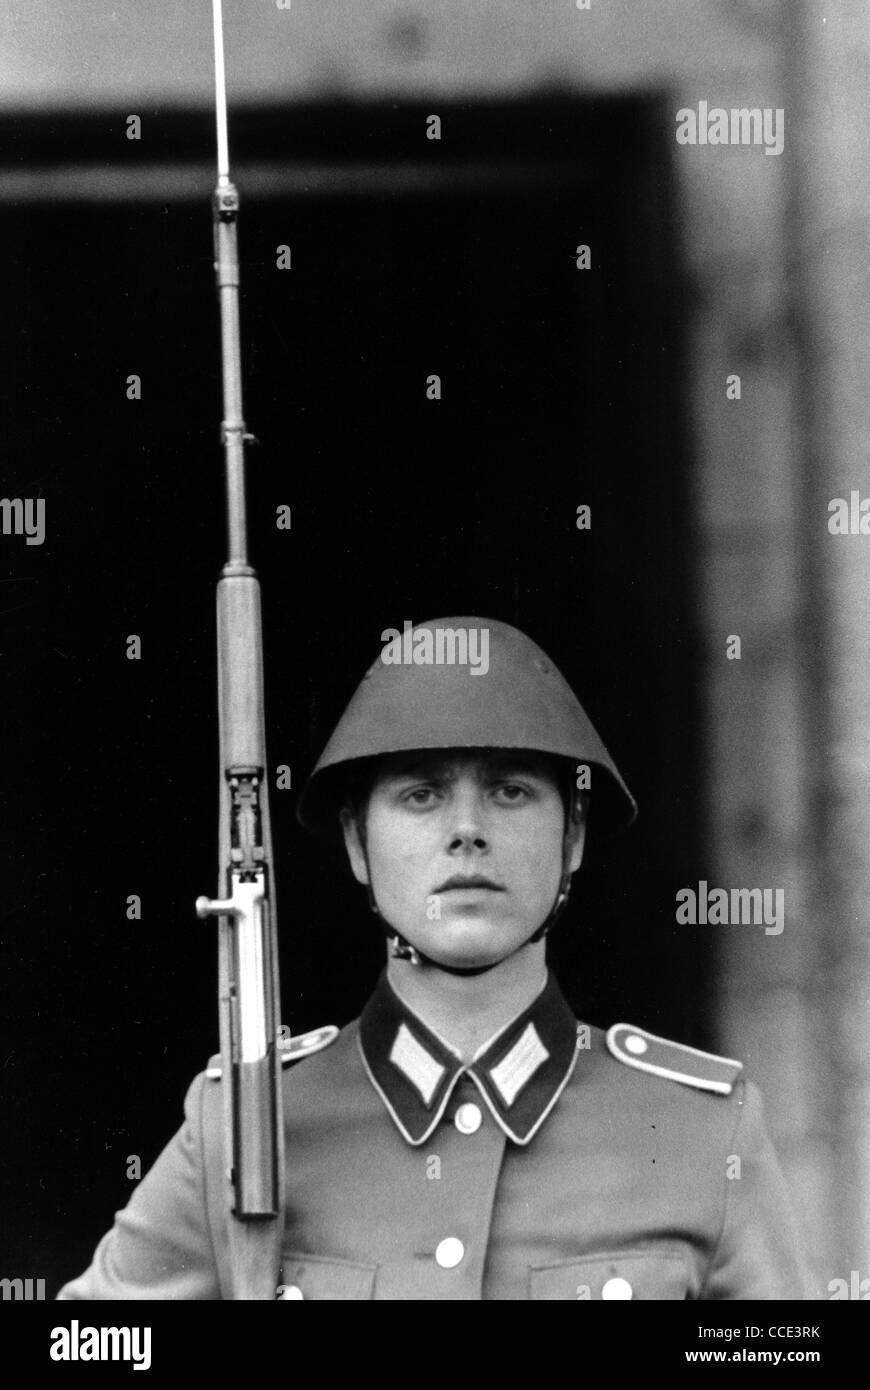 Soldier of the National People's Army of the GDR in East Berlin. Stock Photo